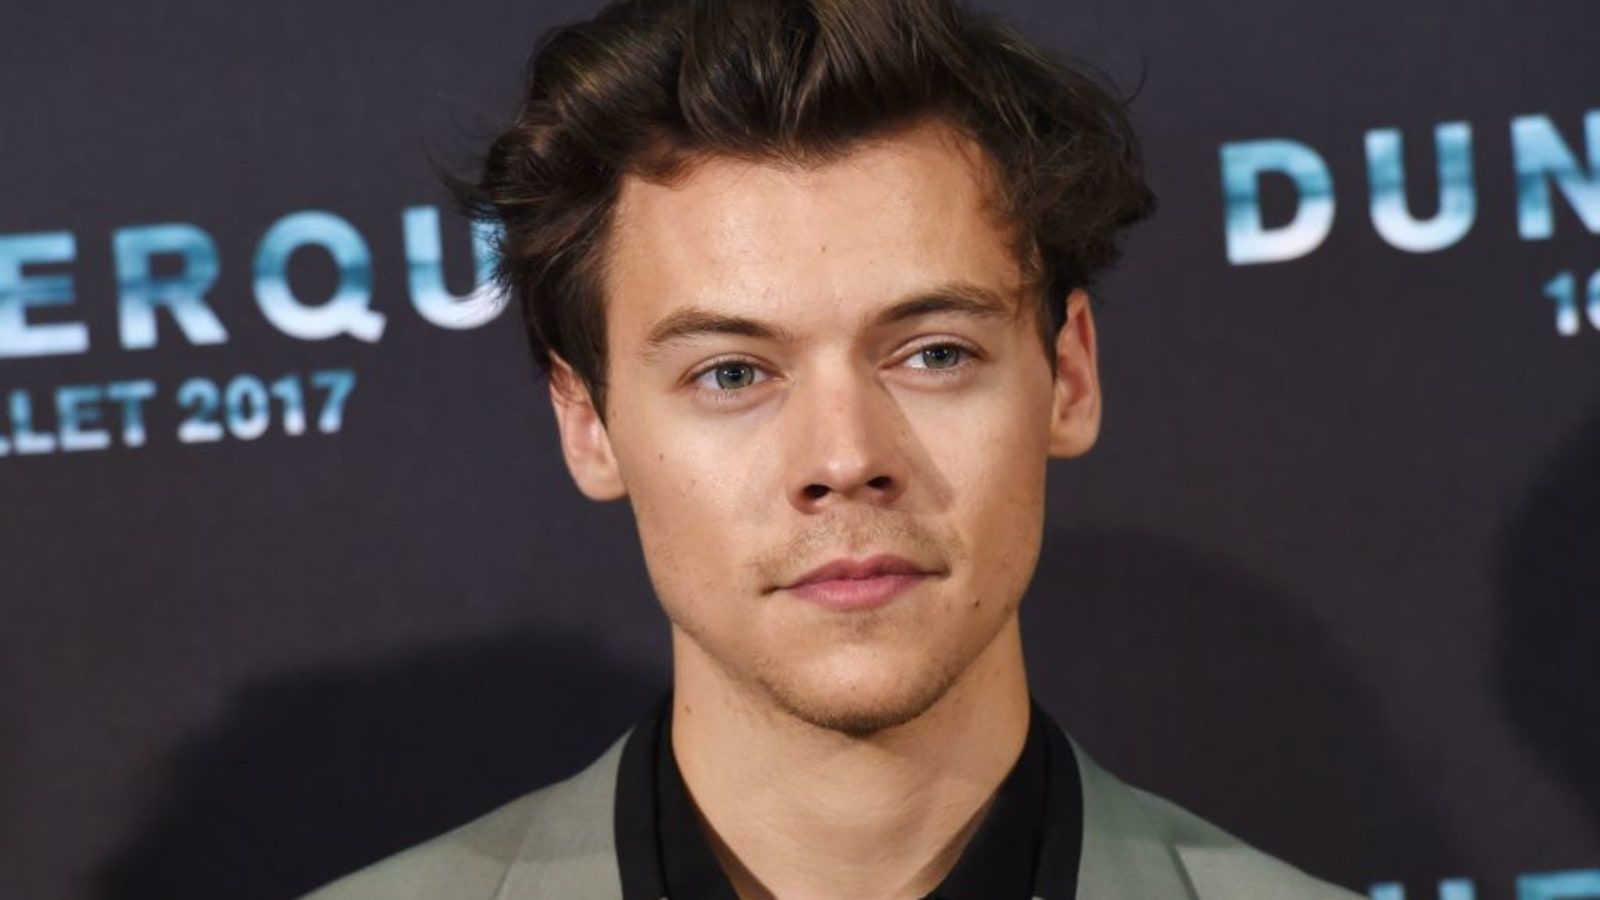 Photos: One Direction's Harry Styles sold LA home for millions